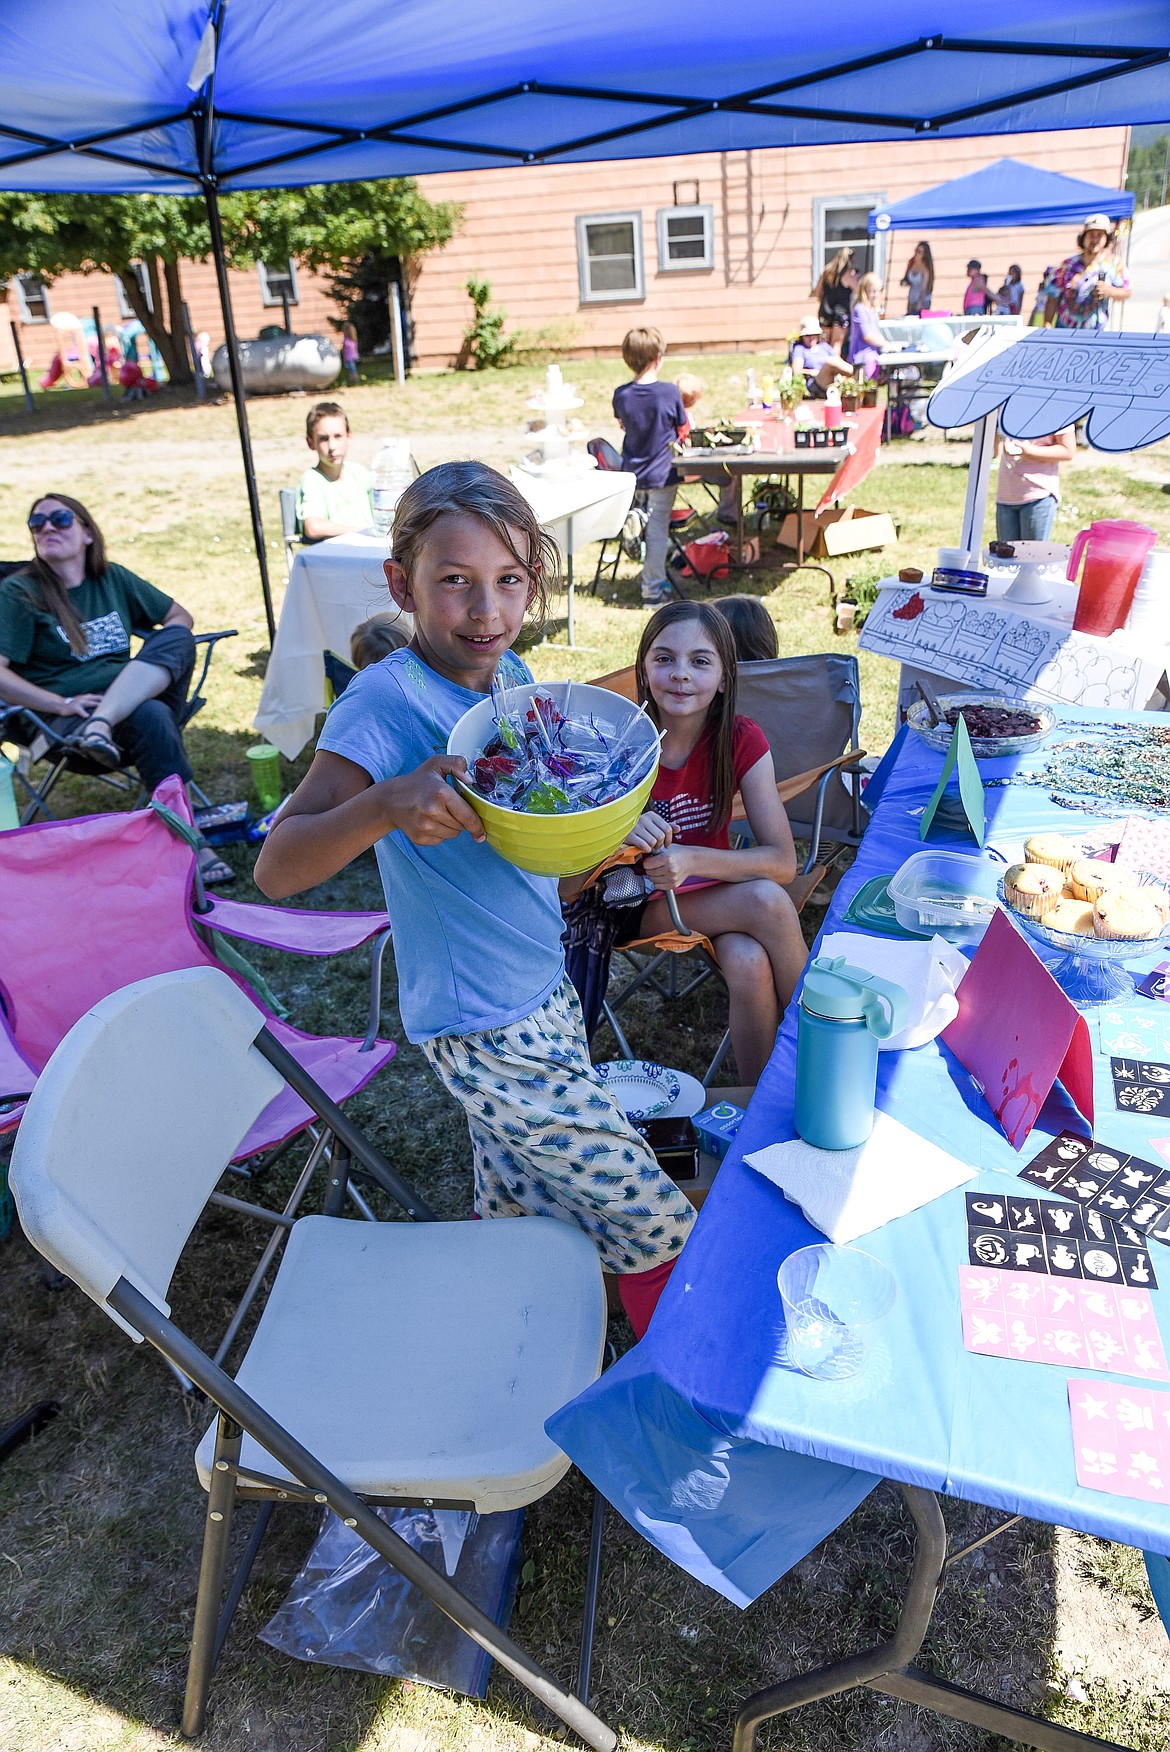 Sammy Evans holds up a bowl of homemade candy she and friend Jenni Brumbaugh (background) were selling at the Libby Kids' Market next to Hotel Libby, Saturday. Evans also had huckleberry muffins, face painting stencils and bandanas she sewed.  (Ben Kibbey/The Western News)